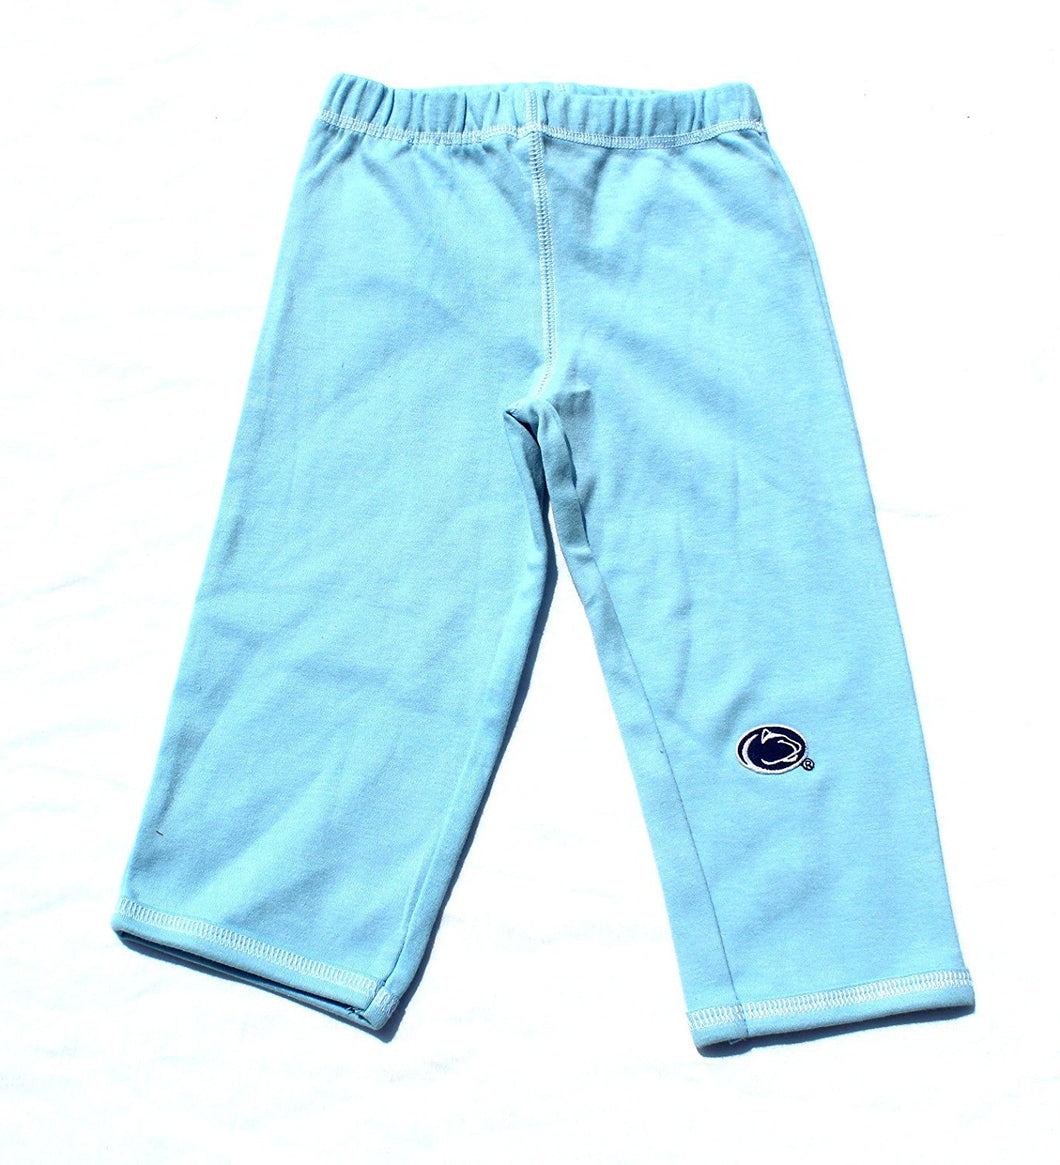 Baby Boys Penn State Nittany Lions Pants Size 18 Months